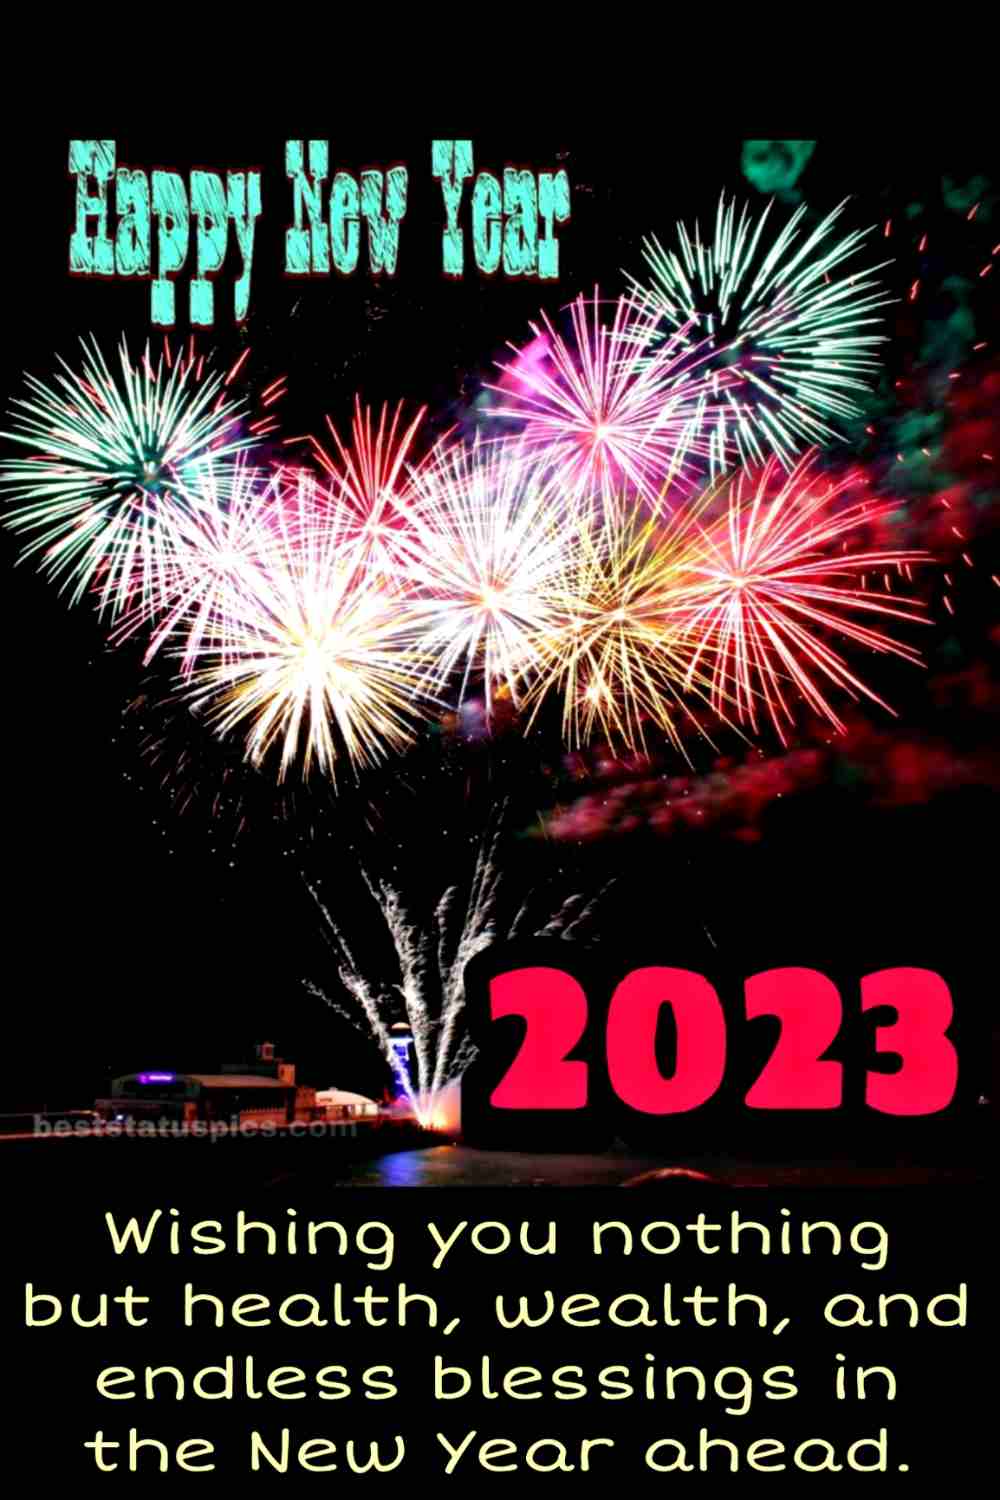 Happy new year 2023 picture HD and quote with firework